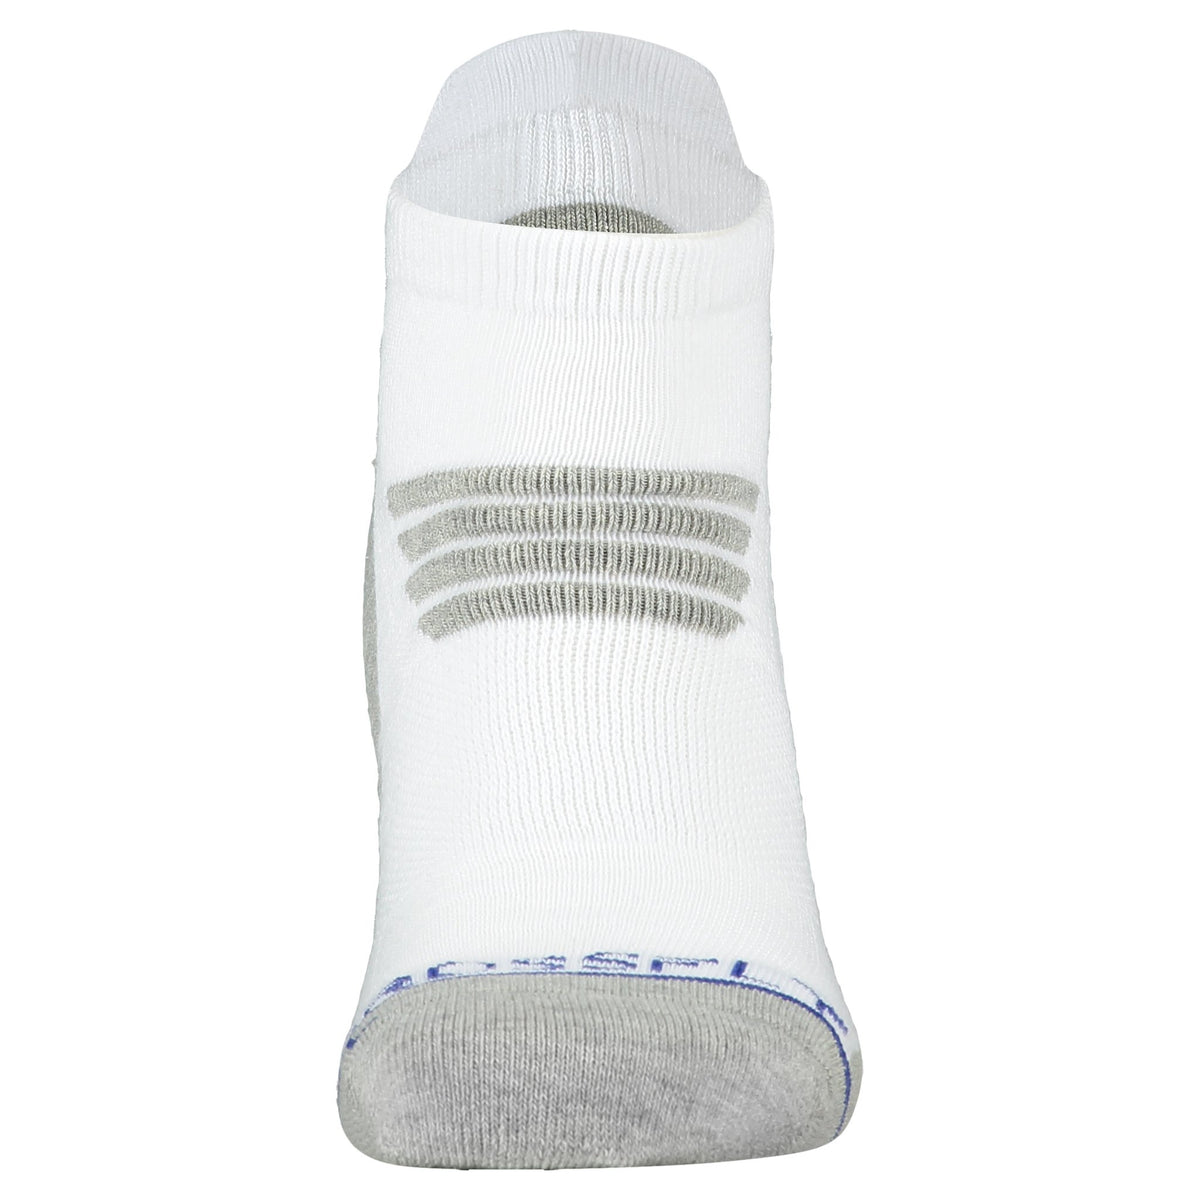 Crossfly men&#39;s Tempo Low Socks in white / grey from the Performance series, featuring AirBeams and 180 Hold.